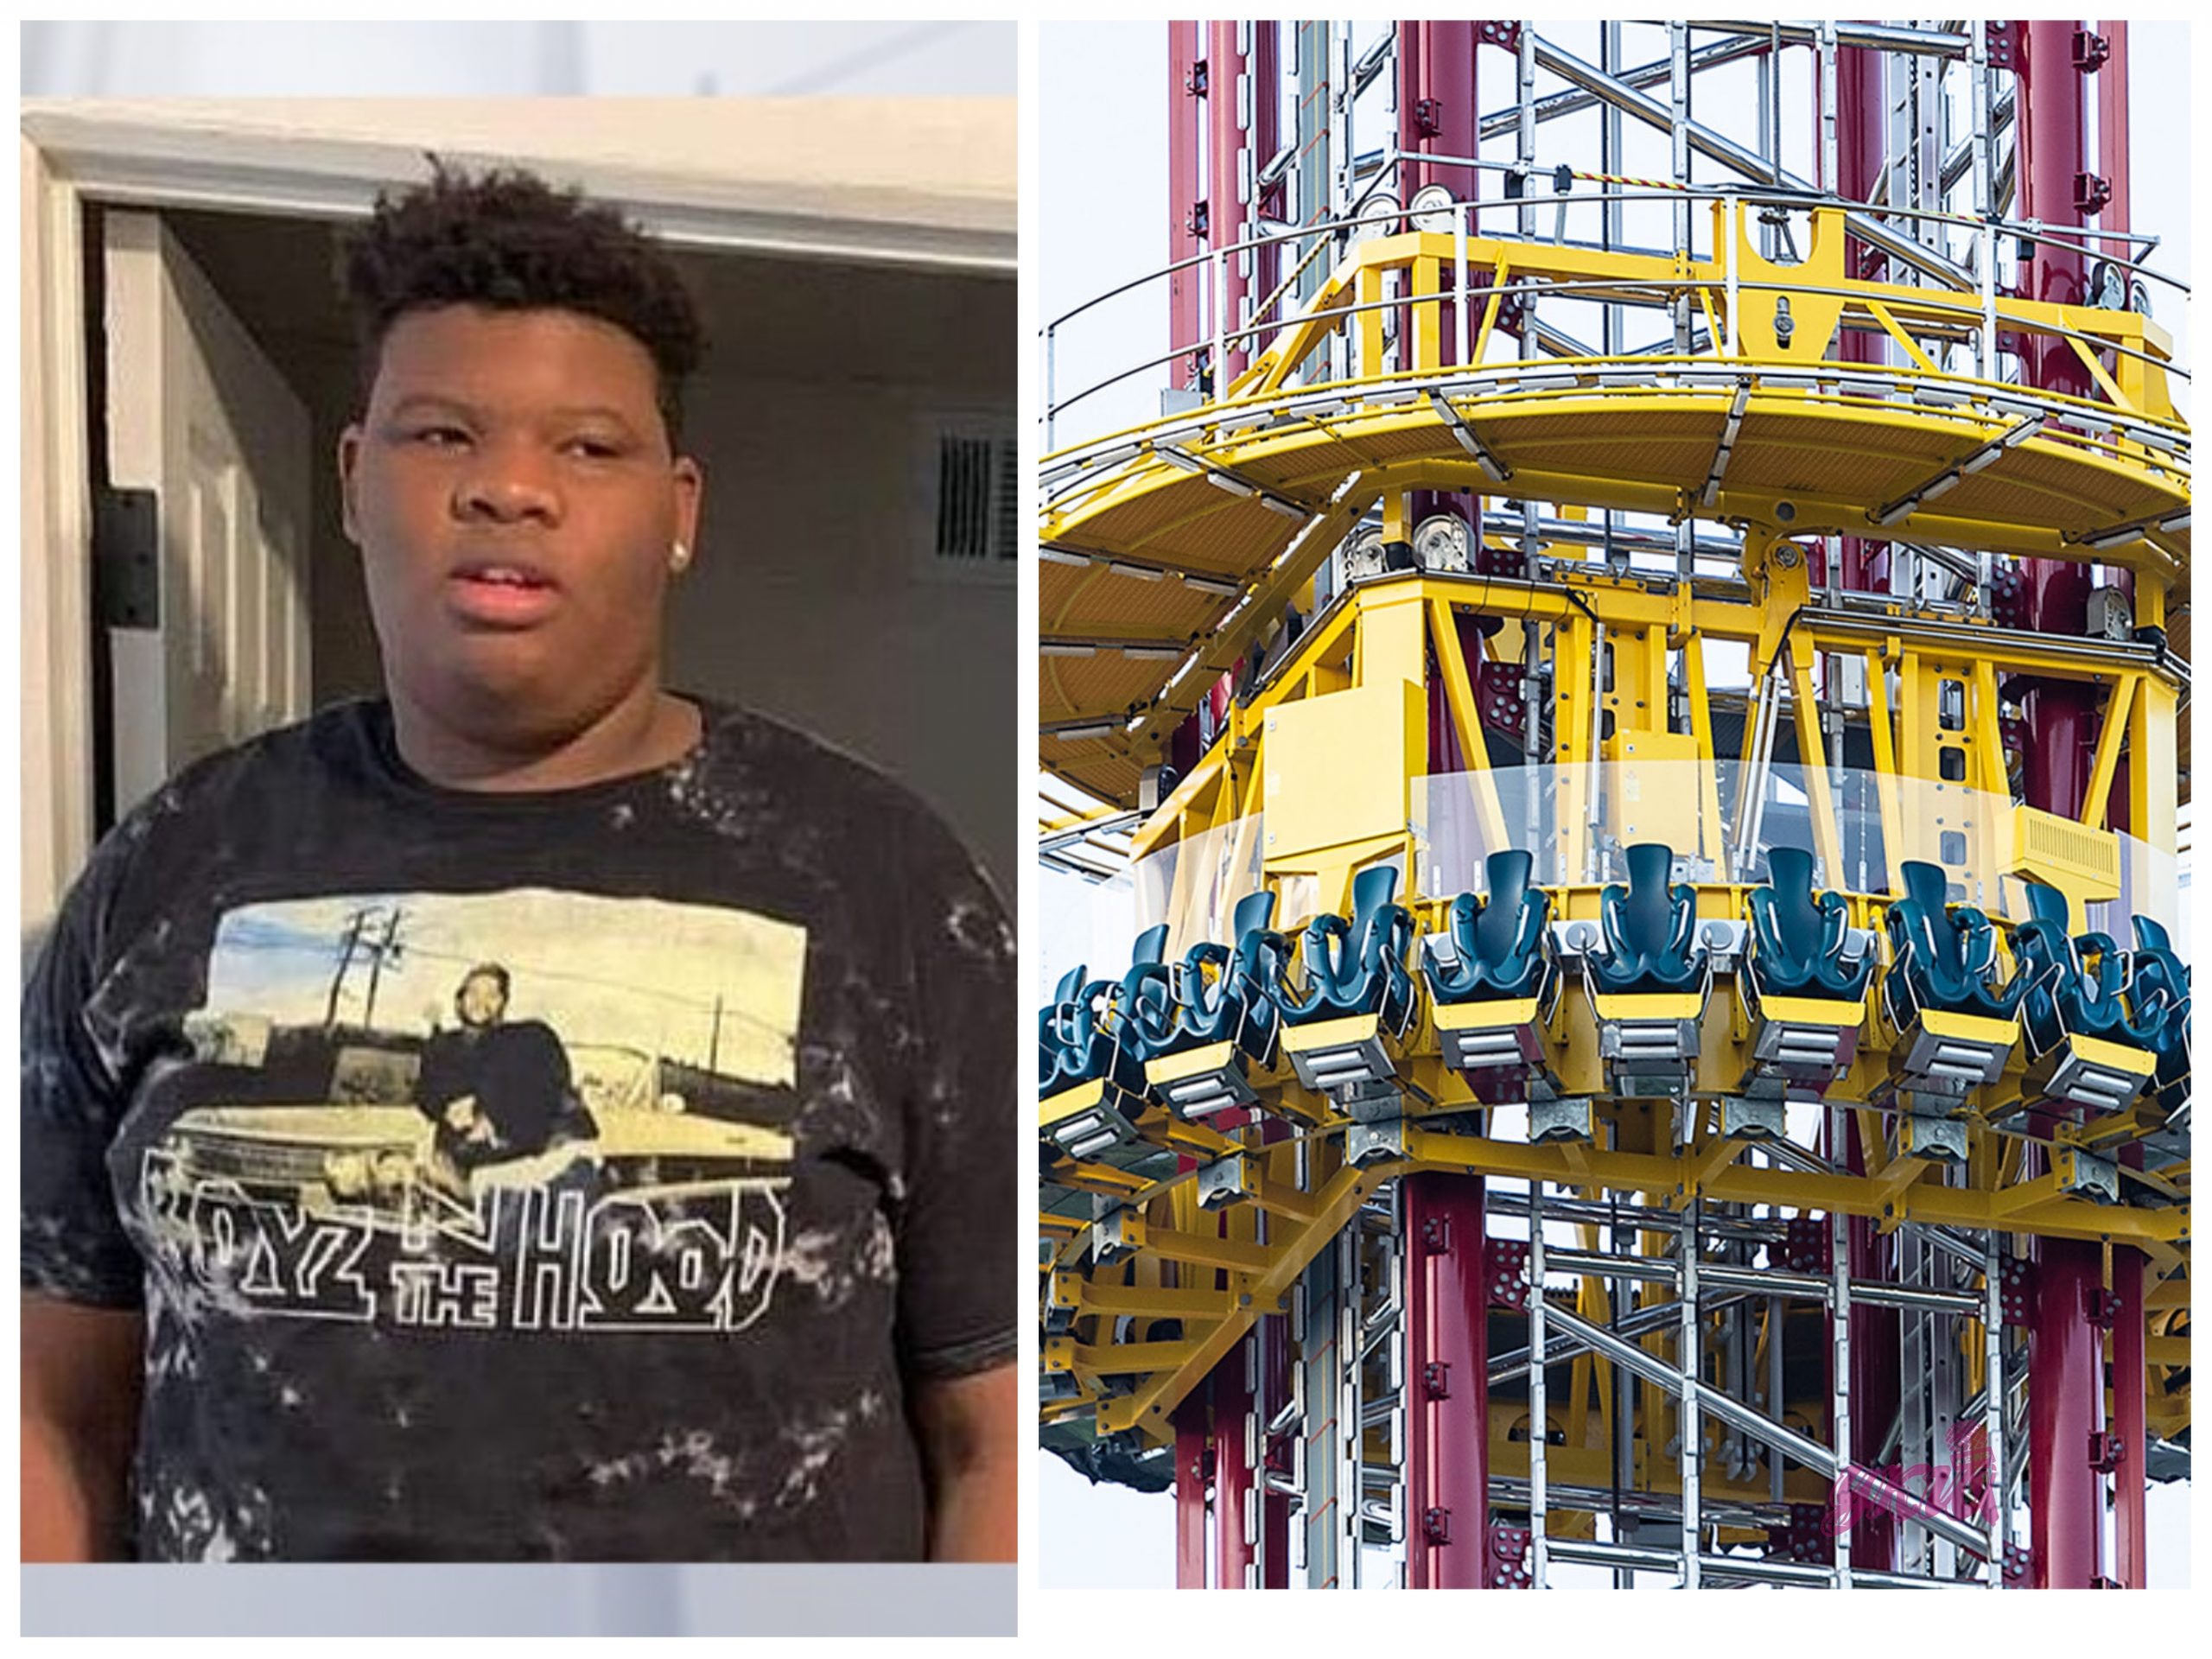 14-Year Old’s Death On Free Fall Ride Is Likely The Result Of Operator Error, Says Ride Safety Expert